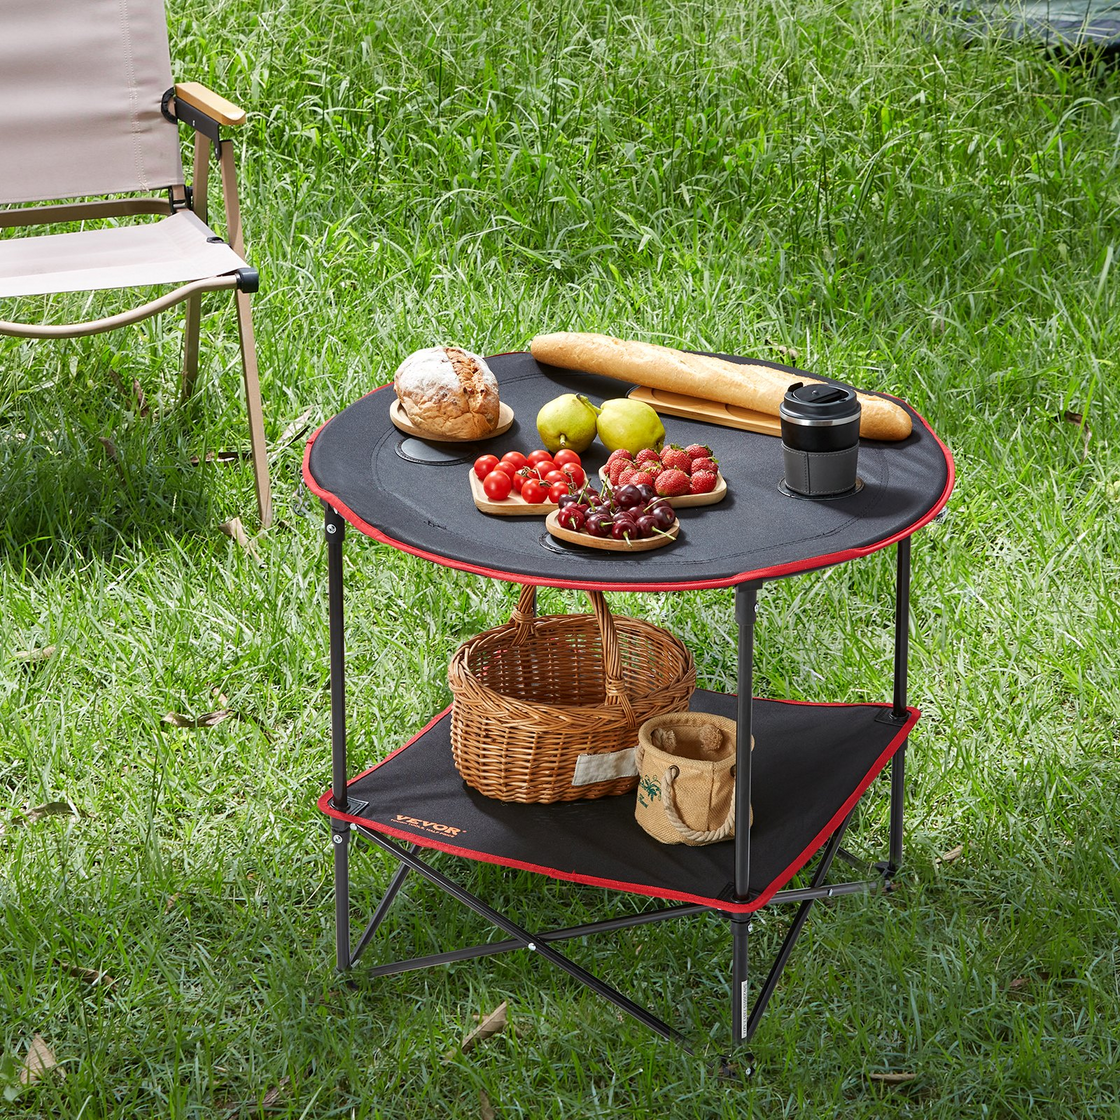 VEVOR Folding Camping Table - Outdoor Portable Side Tables, Lightweight Fold Up Table